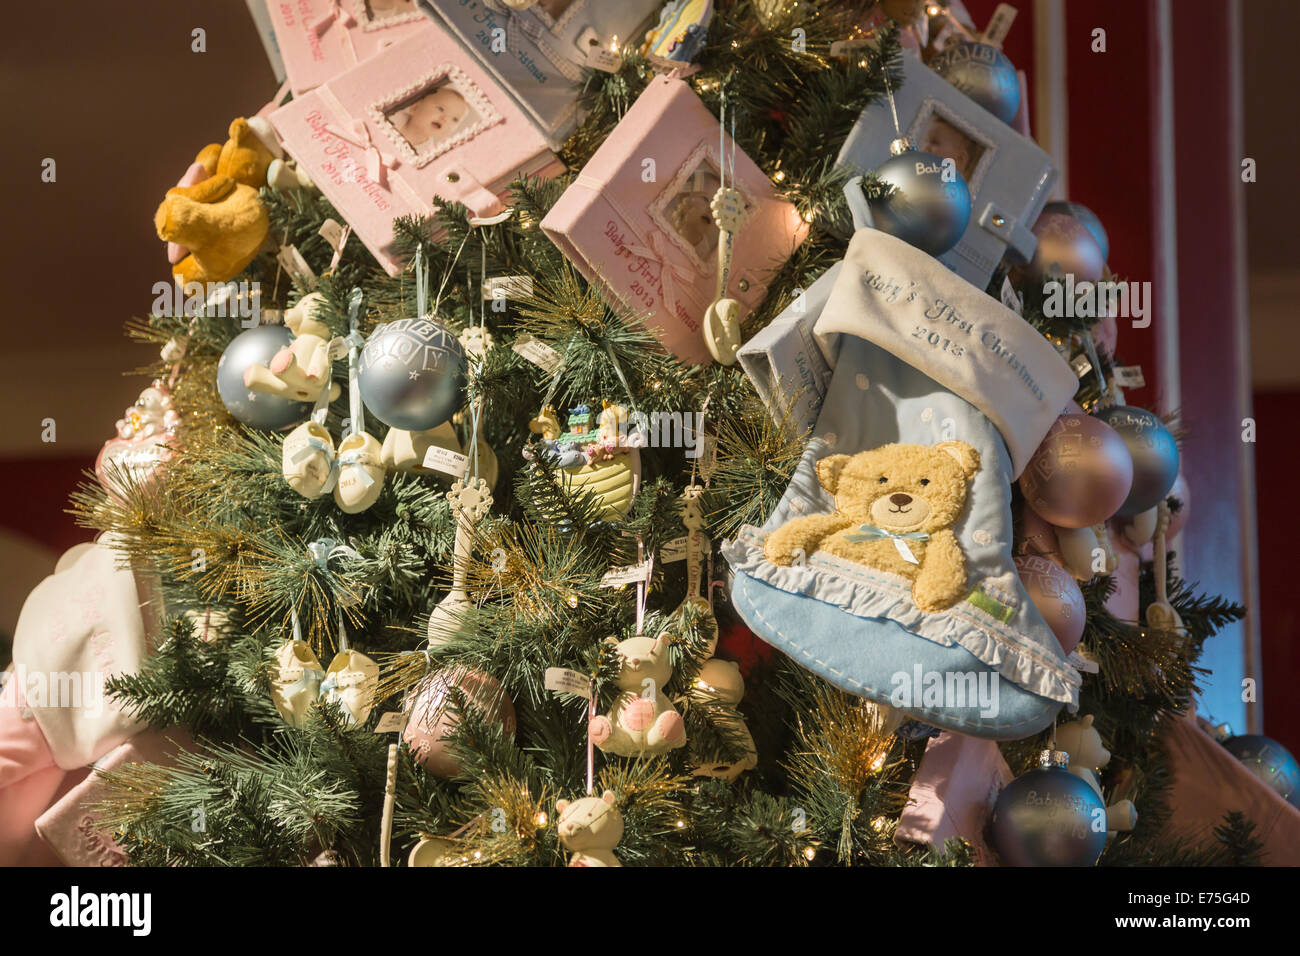 Xmas tree with festive holiday decorations in a New York shop, with blue stocking 'Baby's First Christmas' Stock Photo